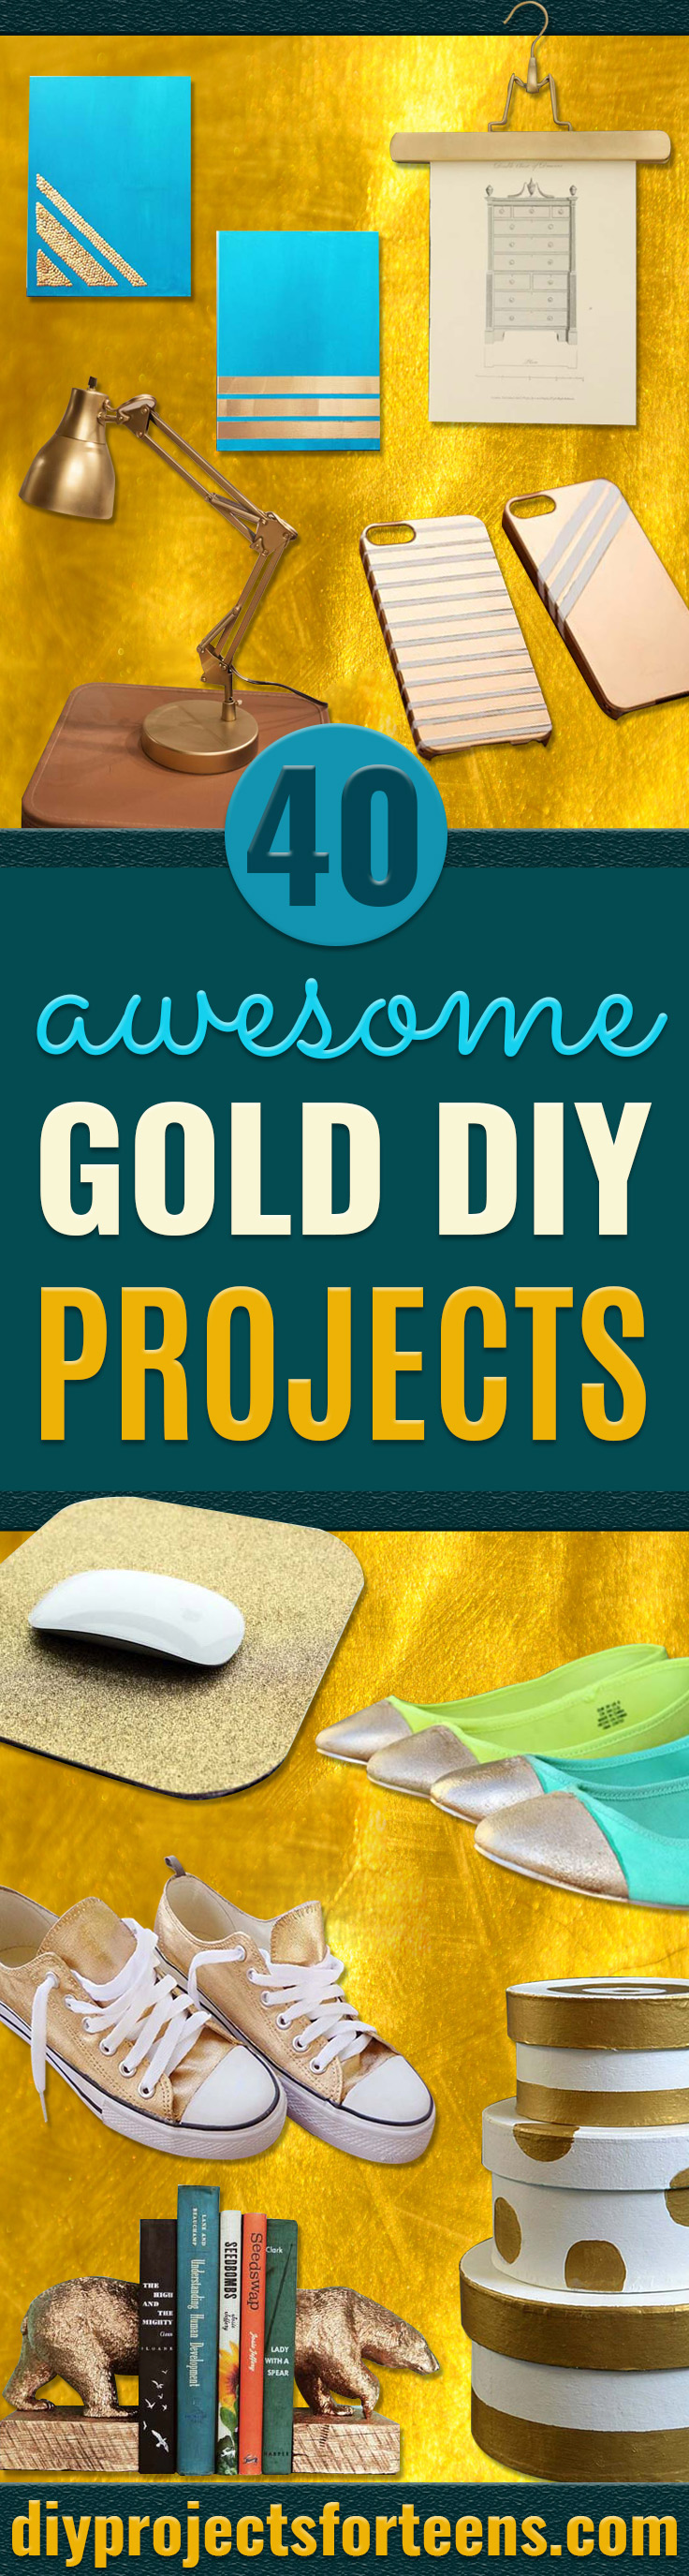 Gold DIY Projects and Crafts - Easy Room Decor, Wall Art and Accessories in Gold - Spray Paint, Painted Ideas, Creative and Cheap Home Decor - Projects and Crafts for Teens, Apartments, Adults and Teenagers http://diyprojectsforteens.com/diy-projects-gold